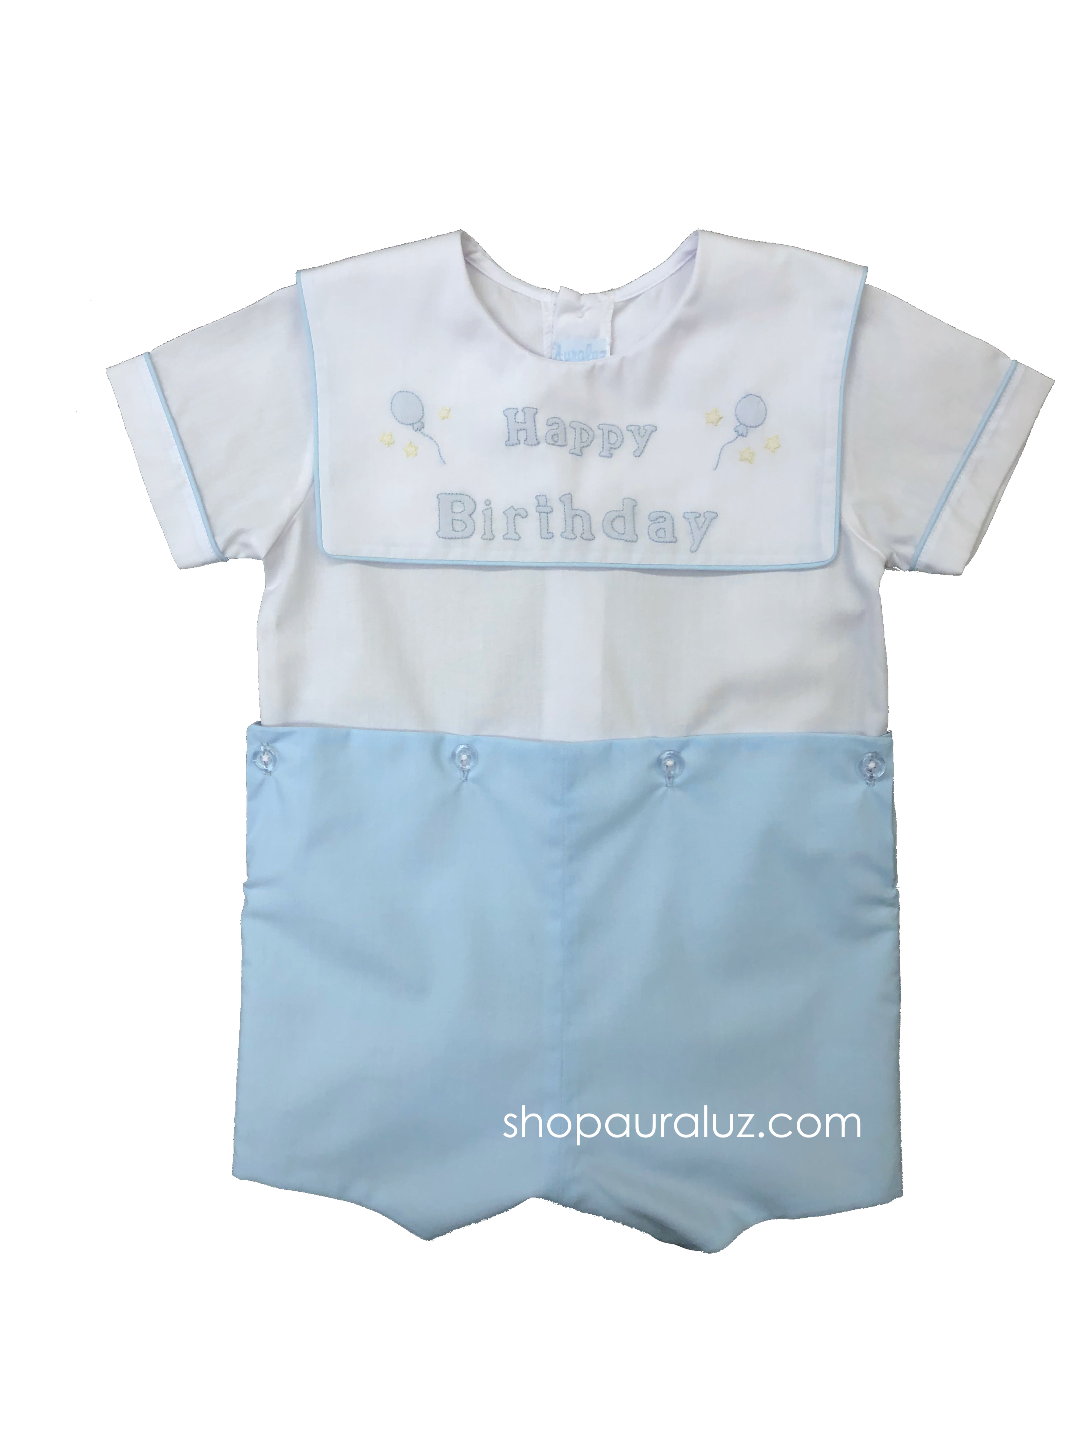 Auraluz Birthday Boy Button-On..Blue with square collar and embroidered "Happy Birthday"